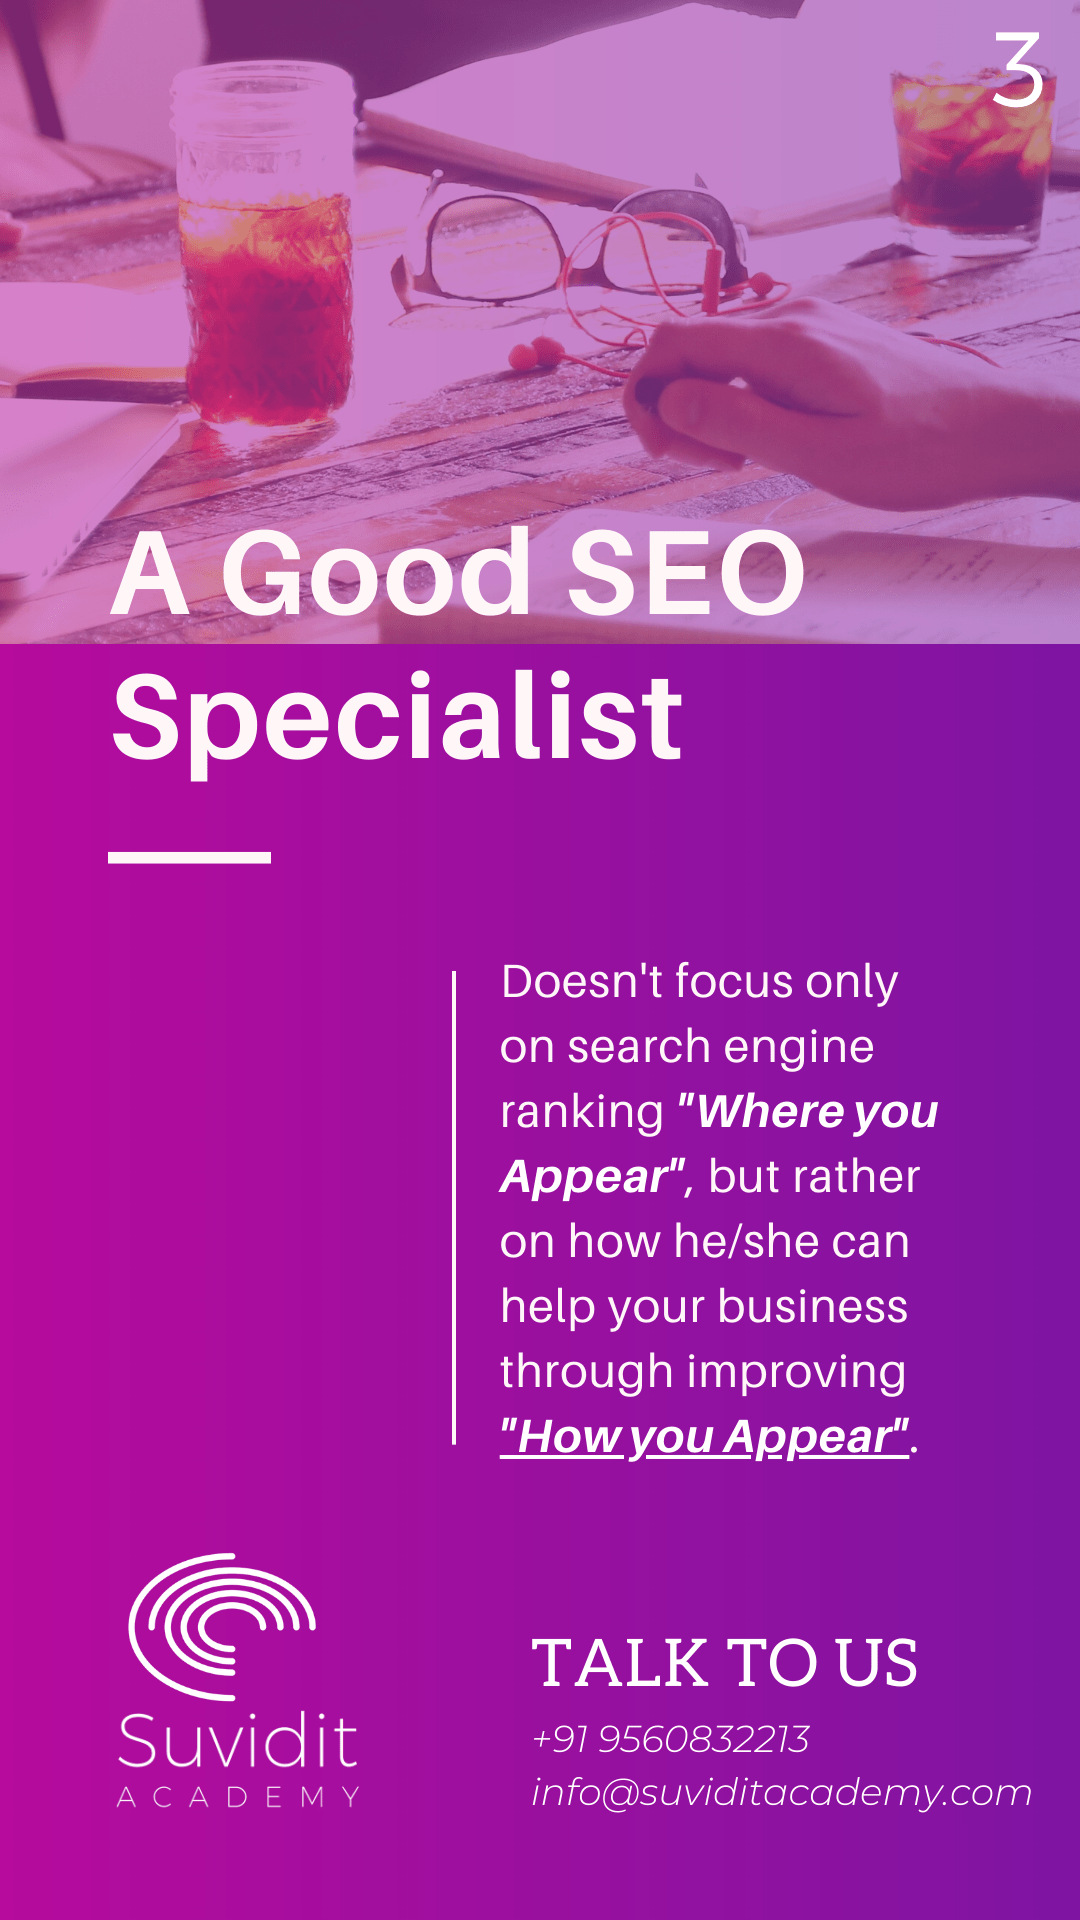 How to Hire SEO Specialist